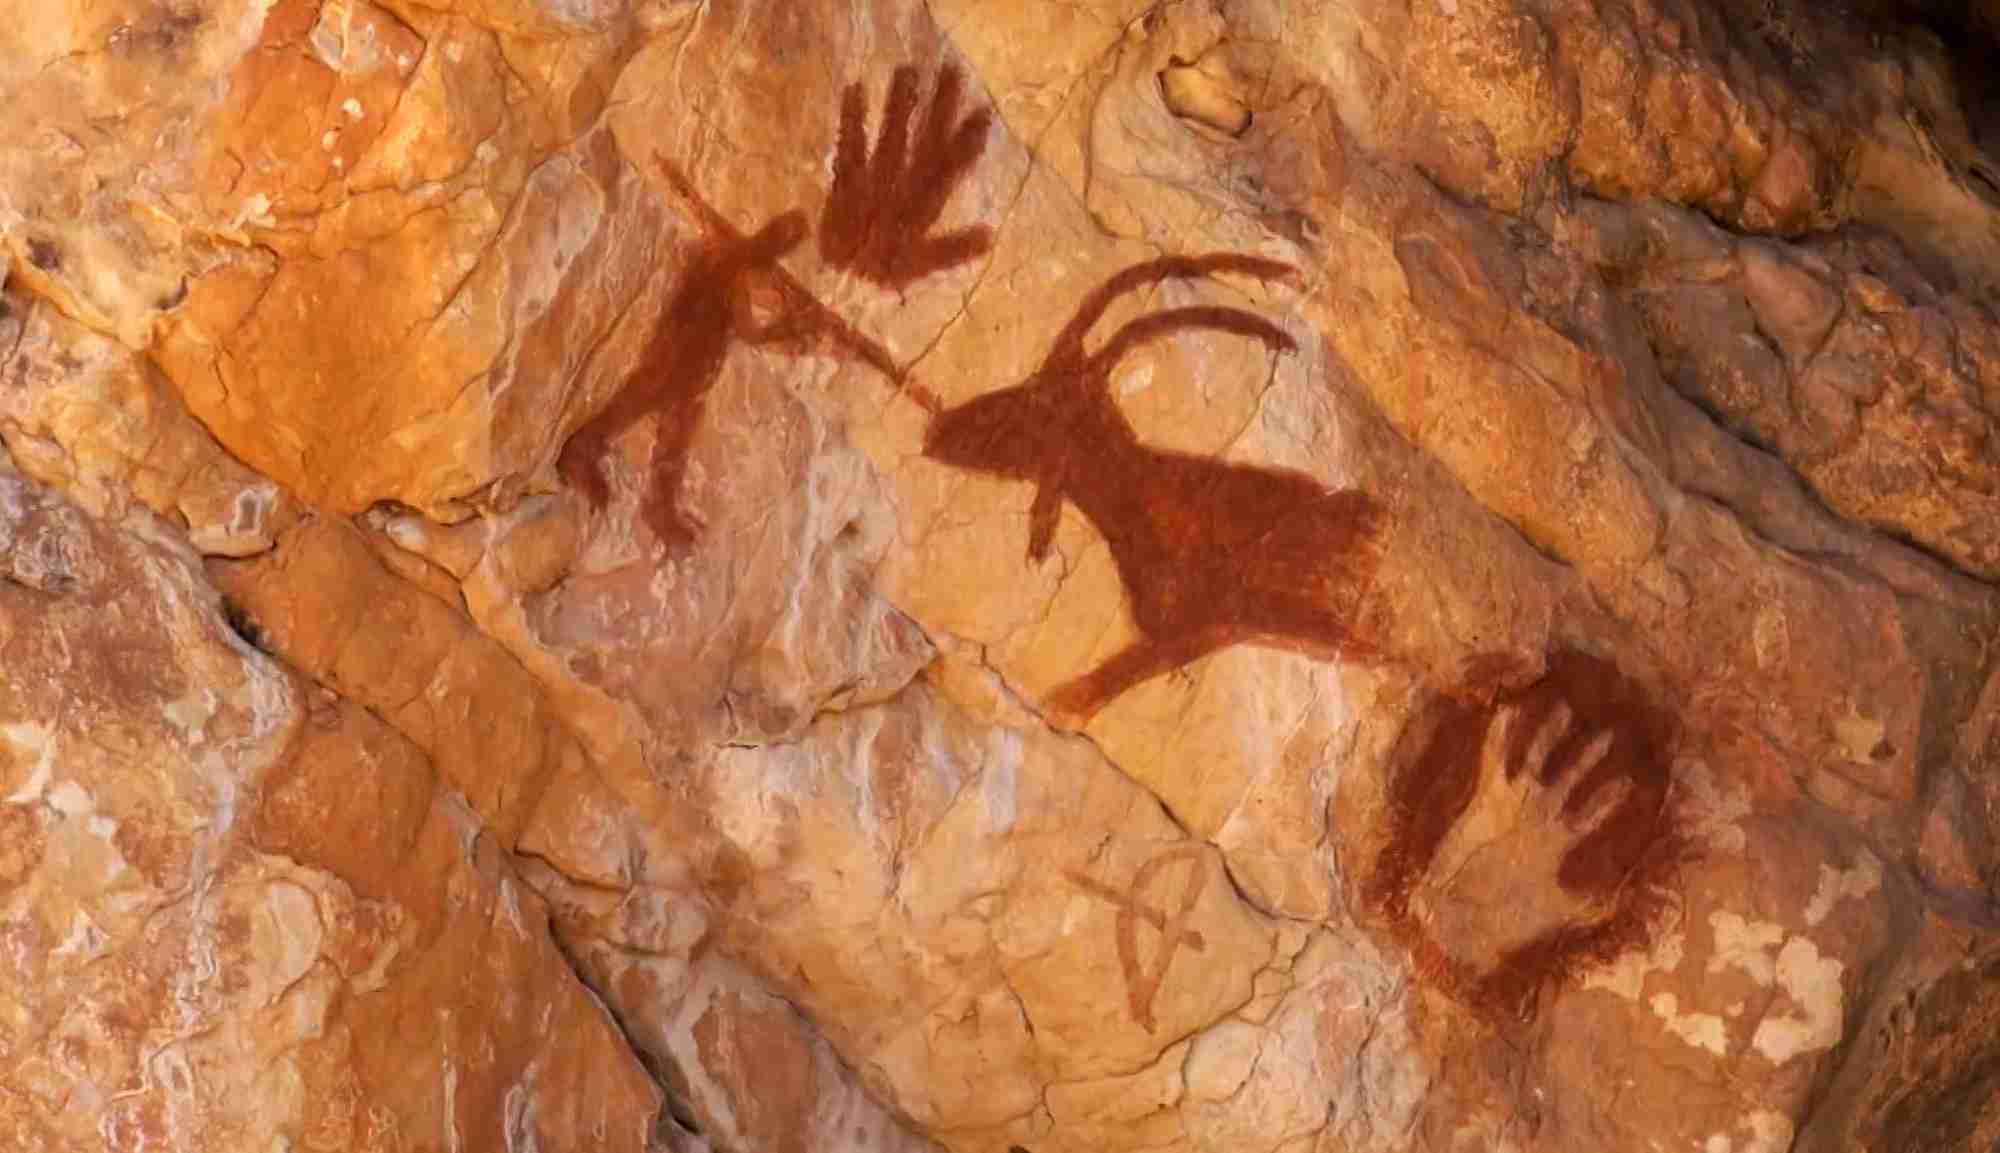 Vandals Graffiti Over Prehistoric Cave Paintings | South Florida Times